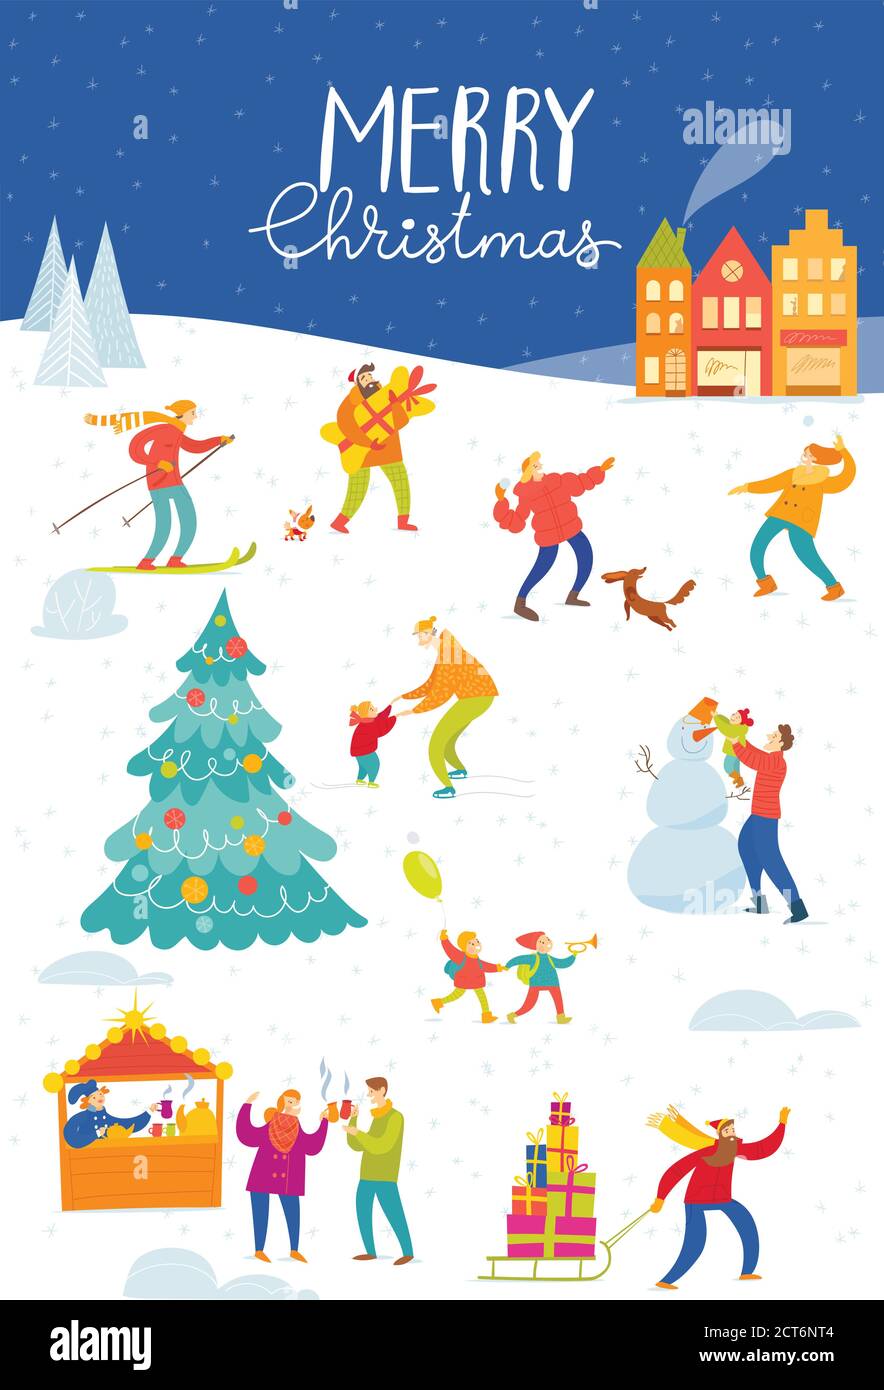 Merry Christmas card with people doing winter activities. Stock Vector